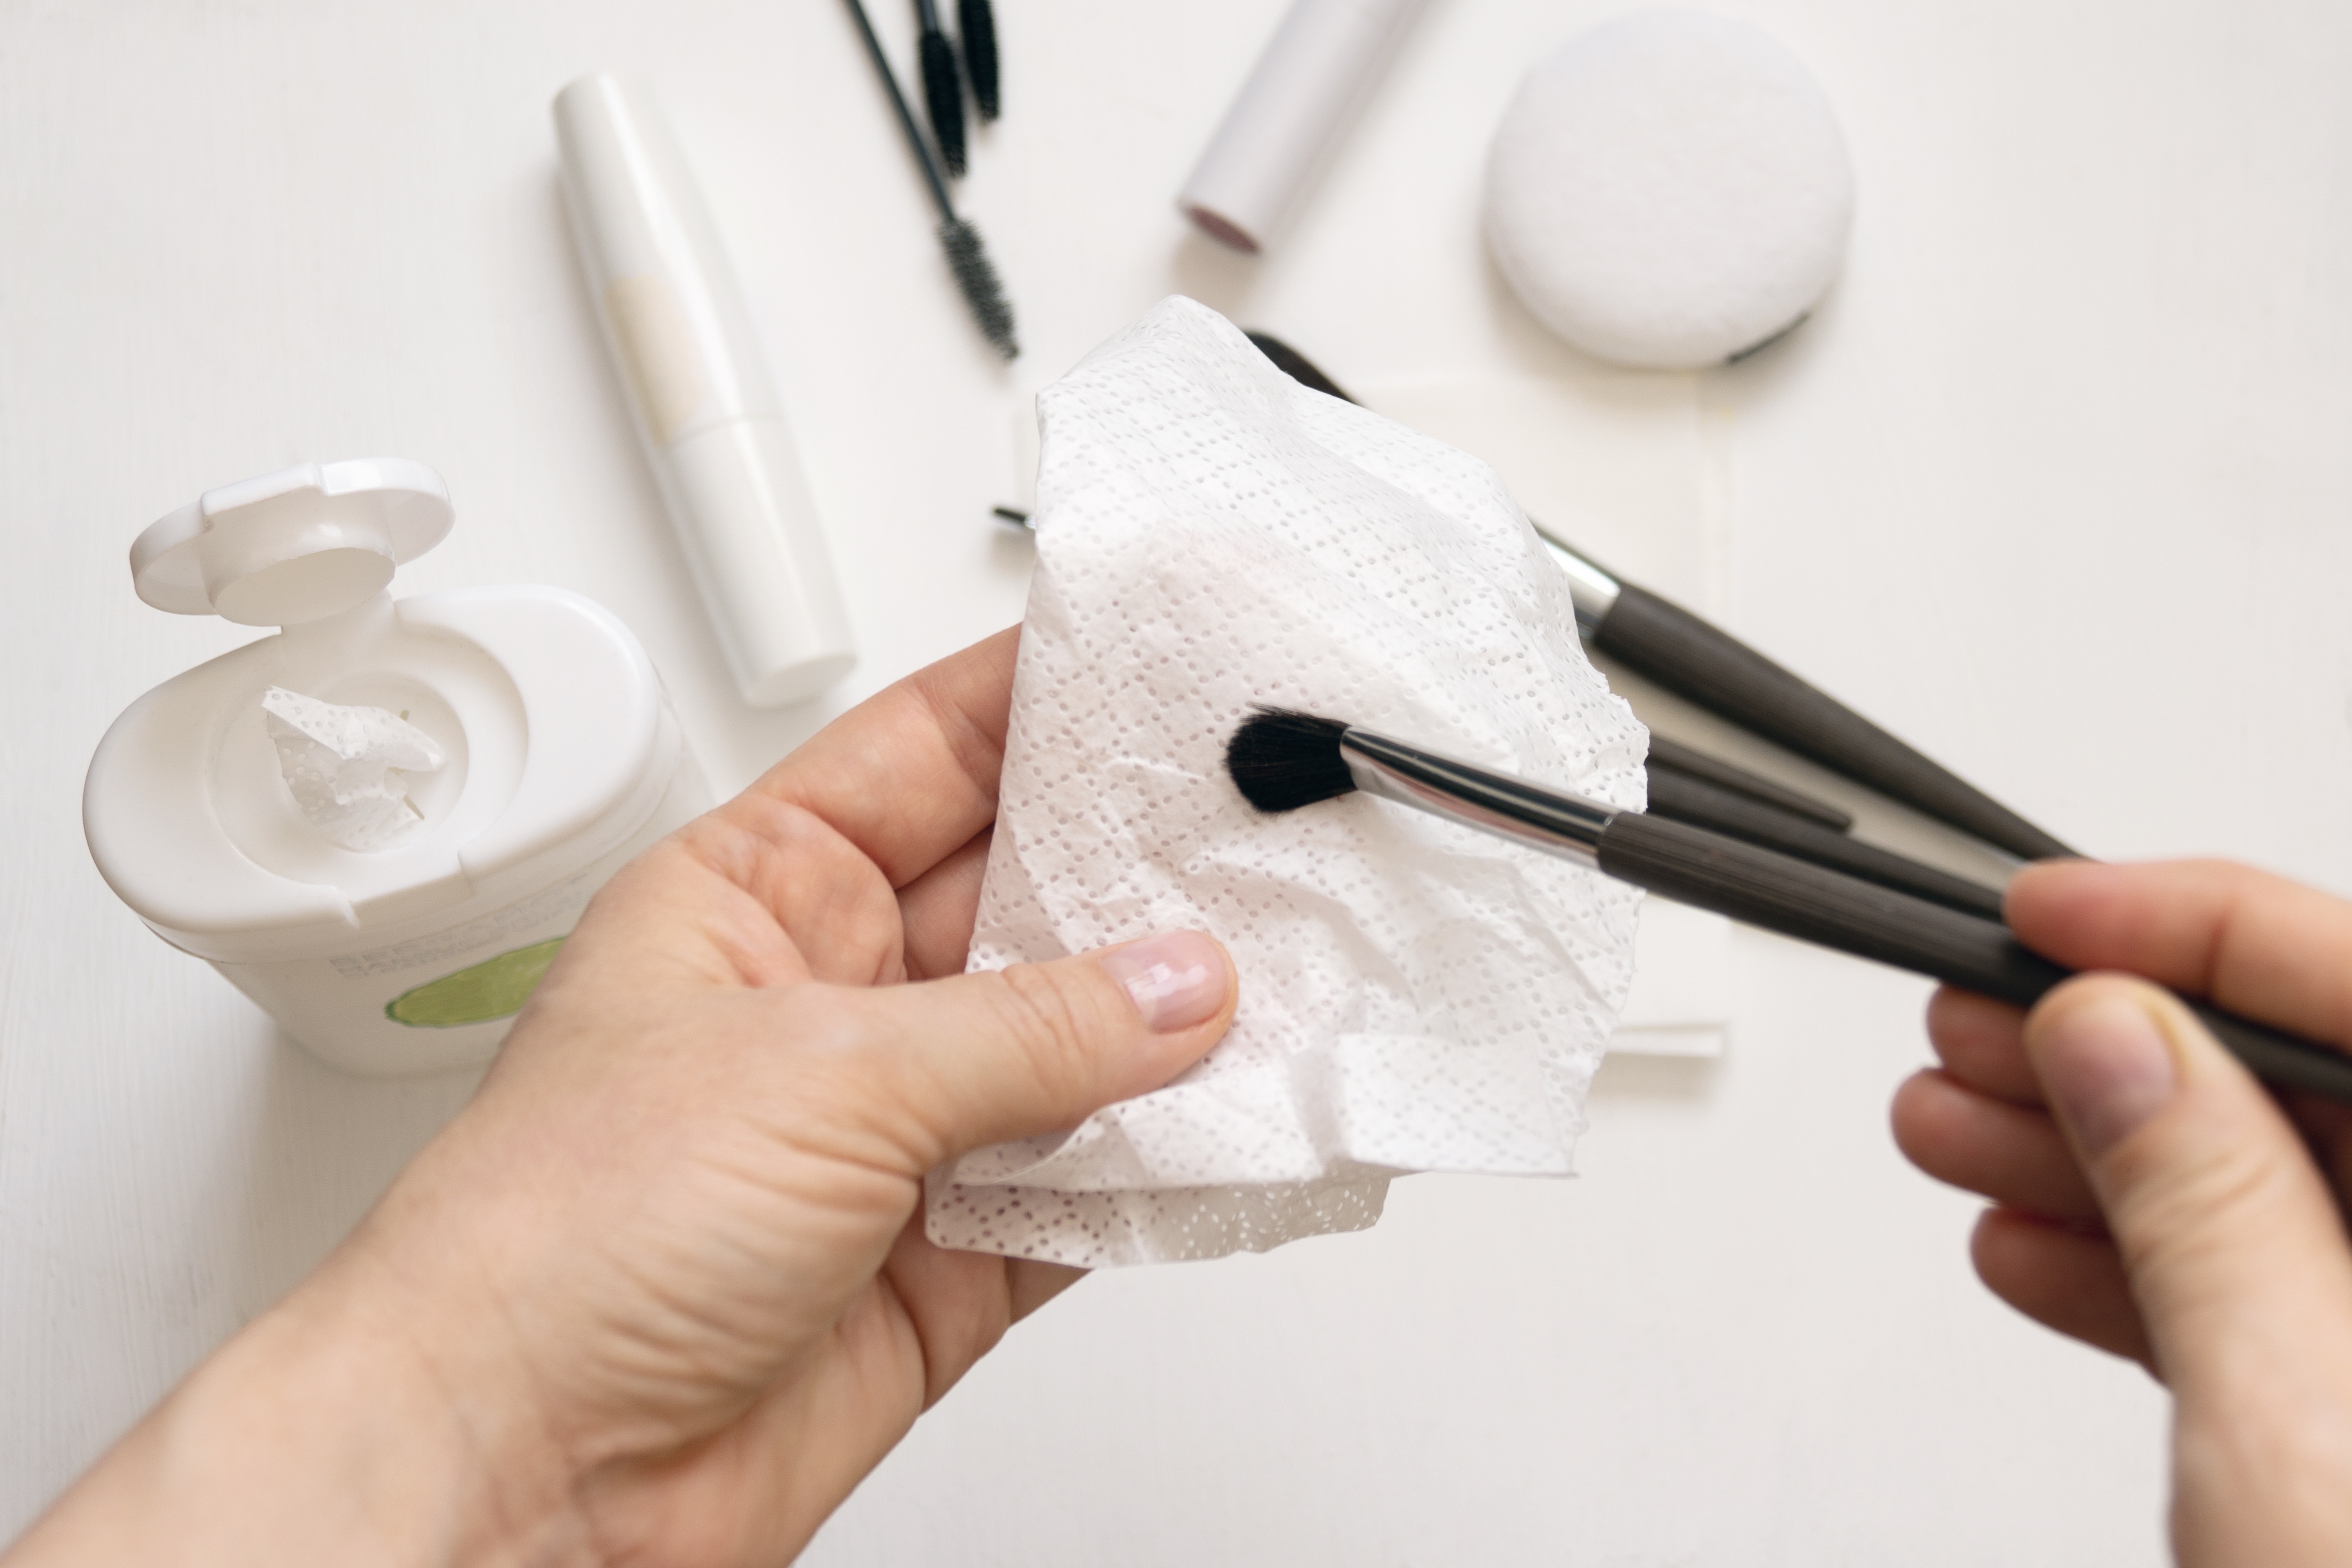 A close-up photo of a person drying a makeup brush using a paper towel | Source: Shutterstock